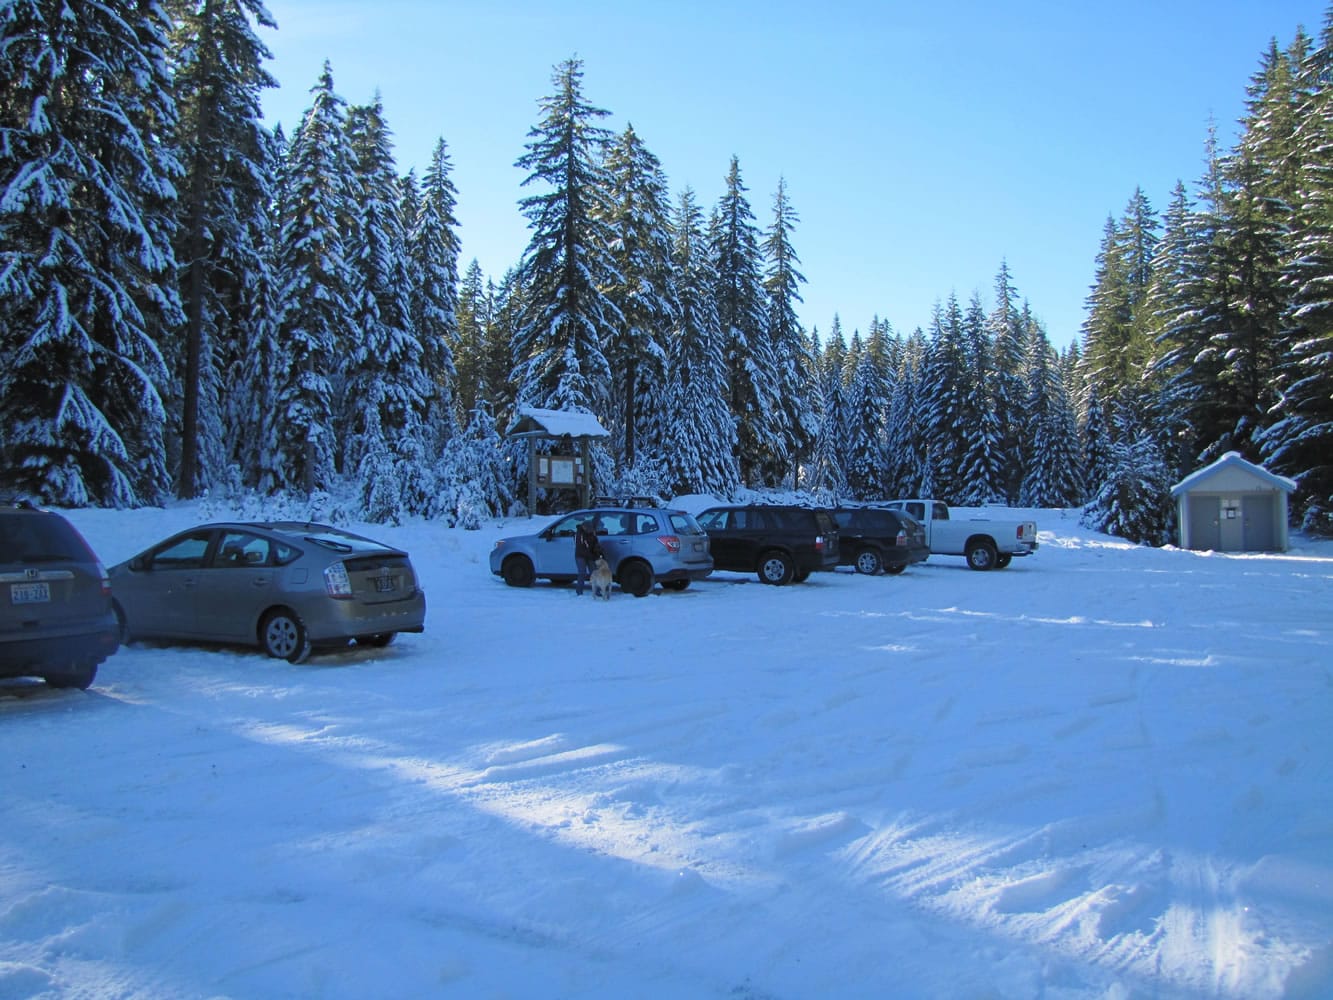 Koshko Sno-Park in the upper Wind River area had a half dozen vehicles parking at noon on New Year's Day.